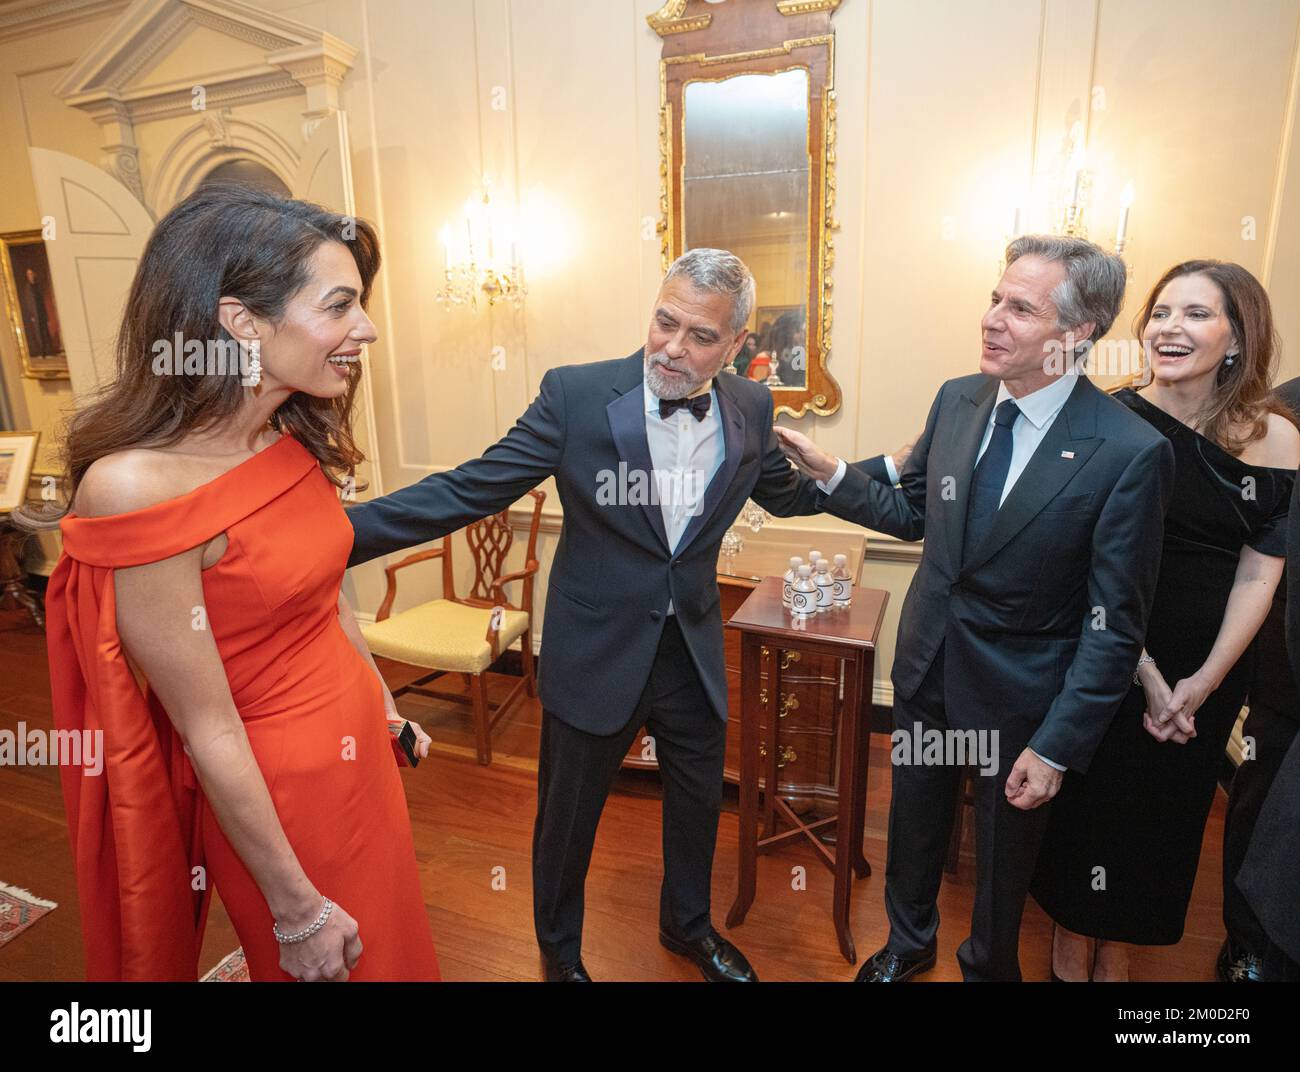 Actor George Clooney and his wife, Amal Clooney at the Kennedy Center Honors Dinner. Secretary of State Antony J. Blinken delivers remarks at the Kennedy Center Honors Dinner in Washington, DC., on December 3, 2022. Stock Photo